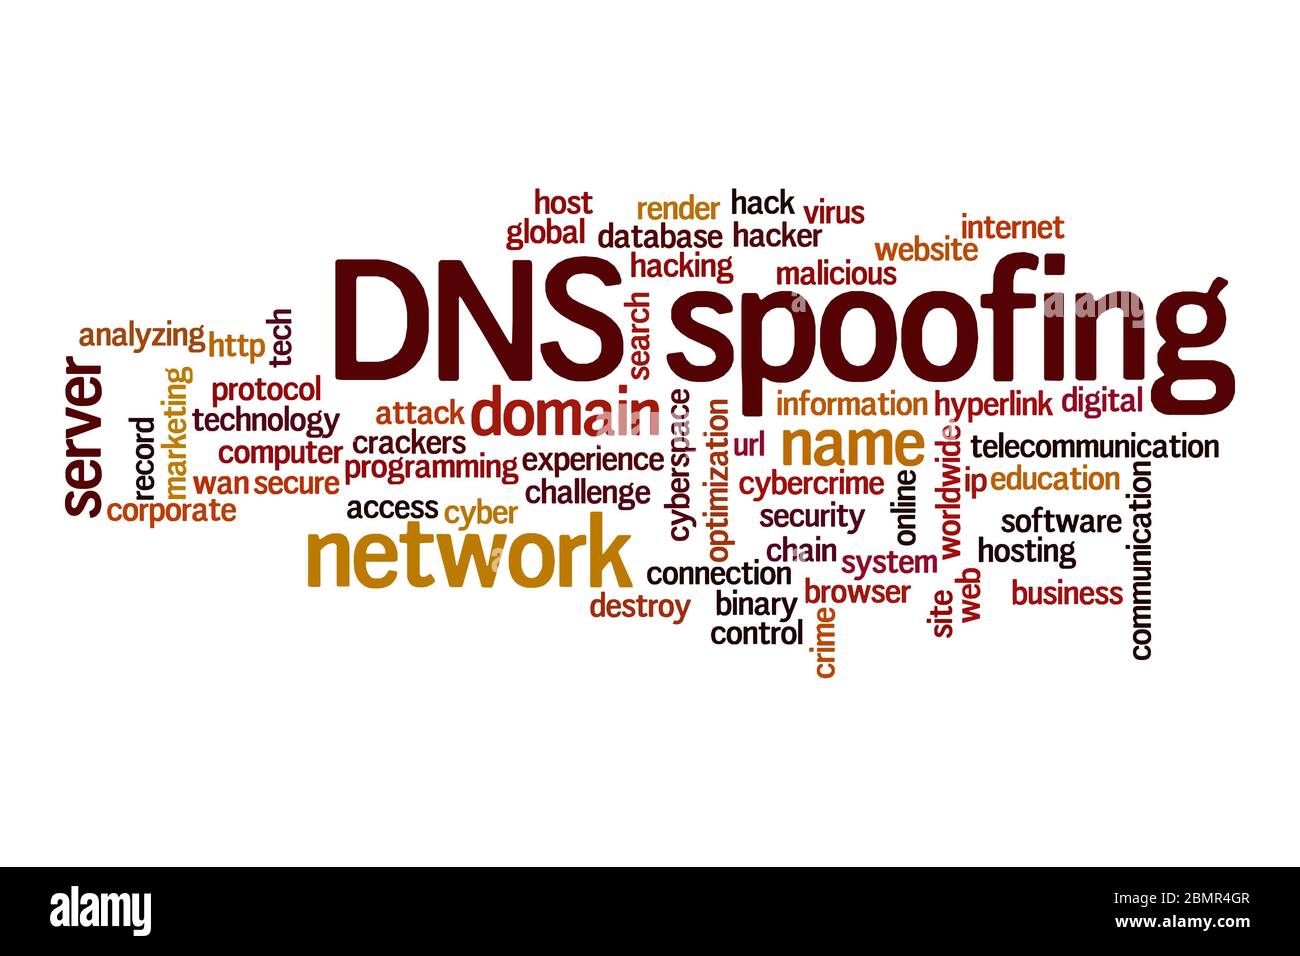 DNS spoofing word cloud concept on white background Stock Photo